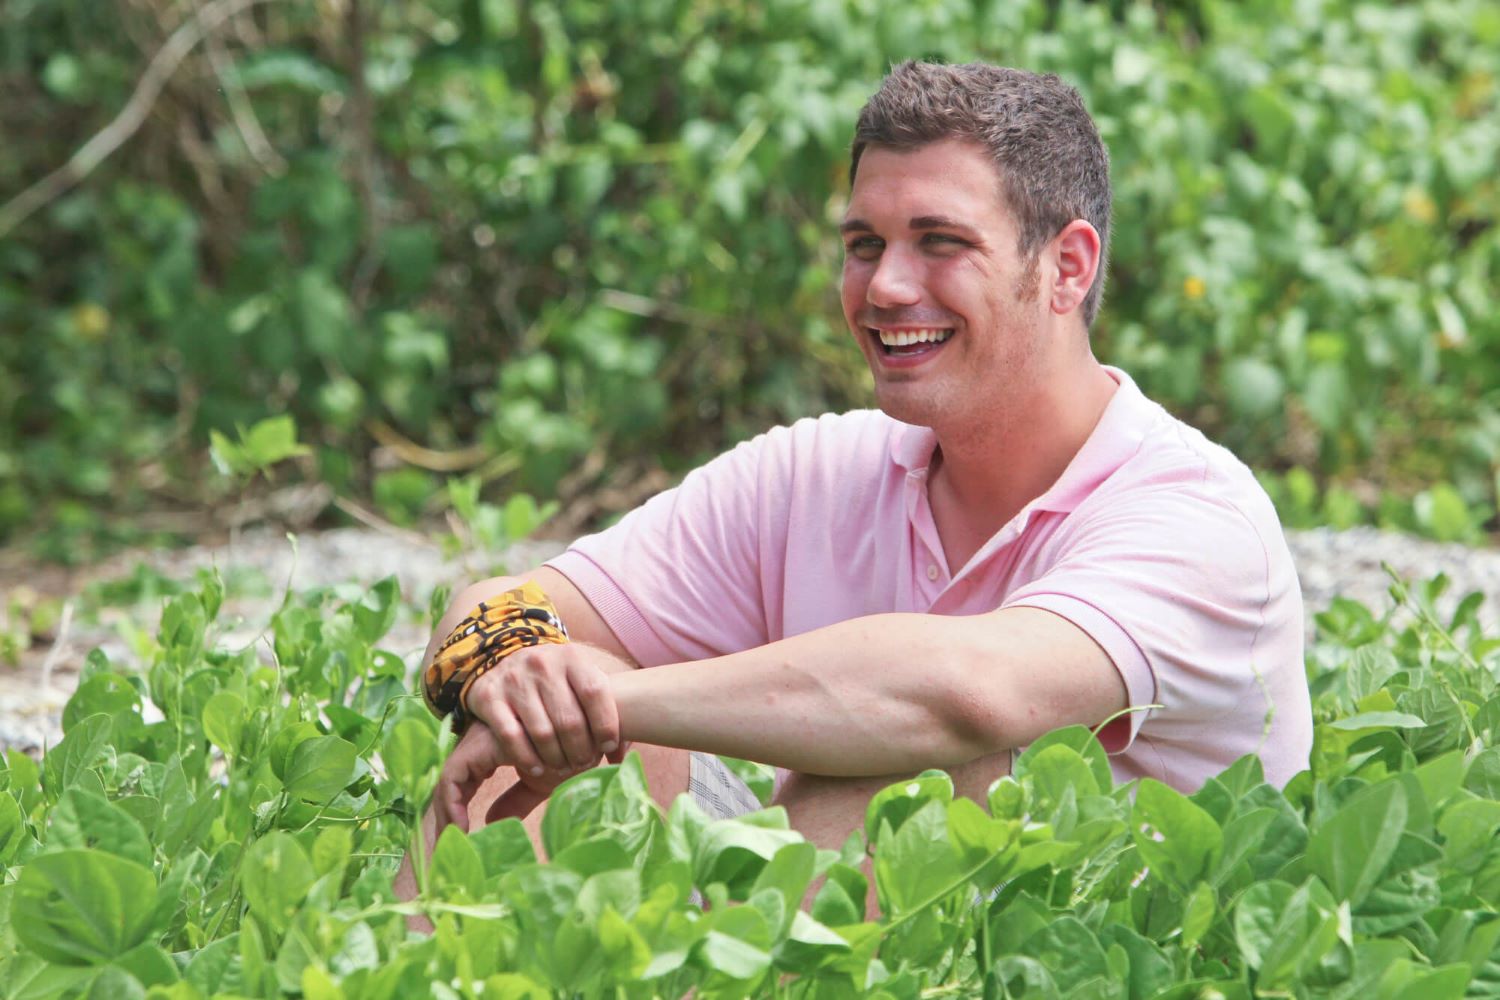 Colton Cumbie , who likely didn't get paid for appearing on two seasons of 'Survivor,' wears a light pink polo shirt.